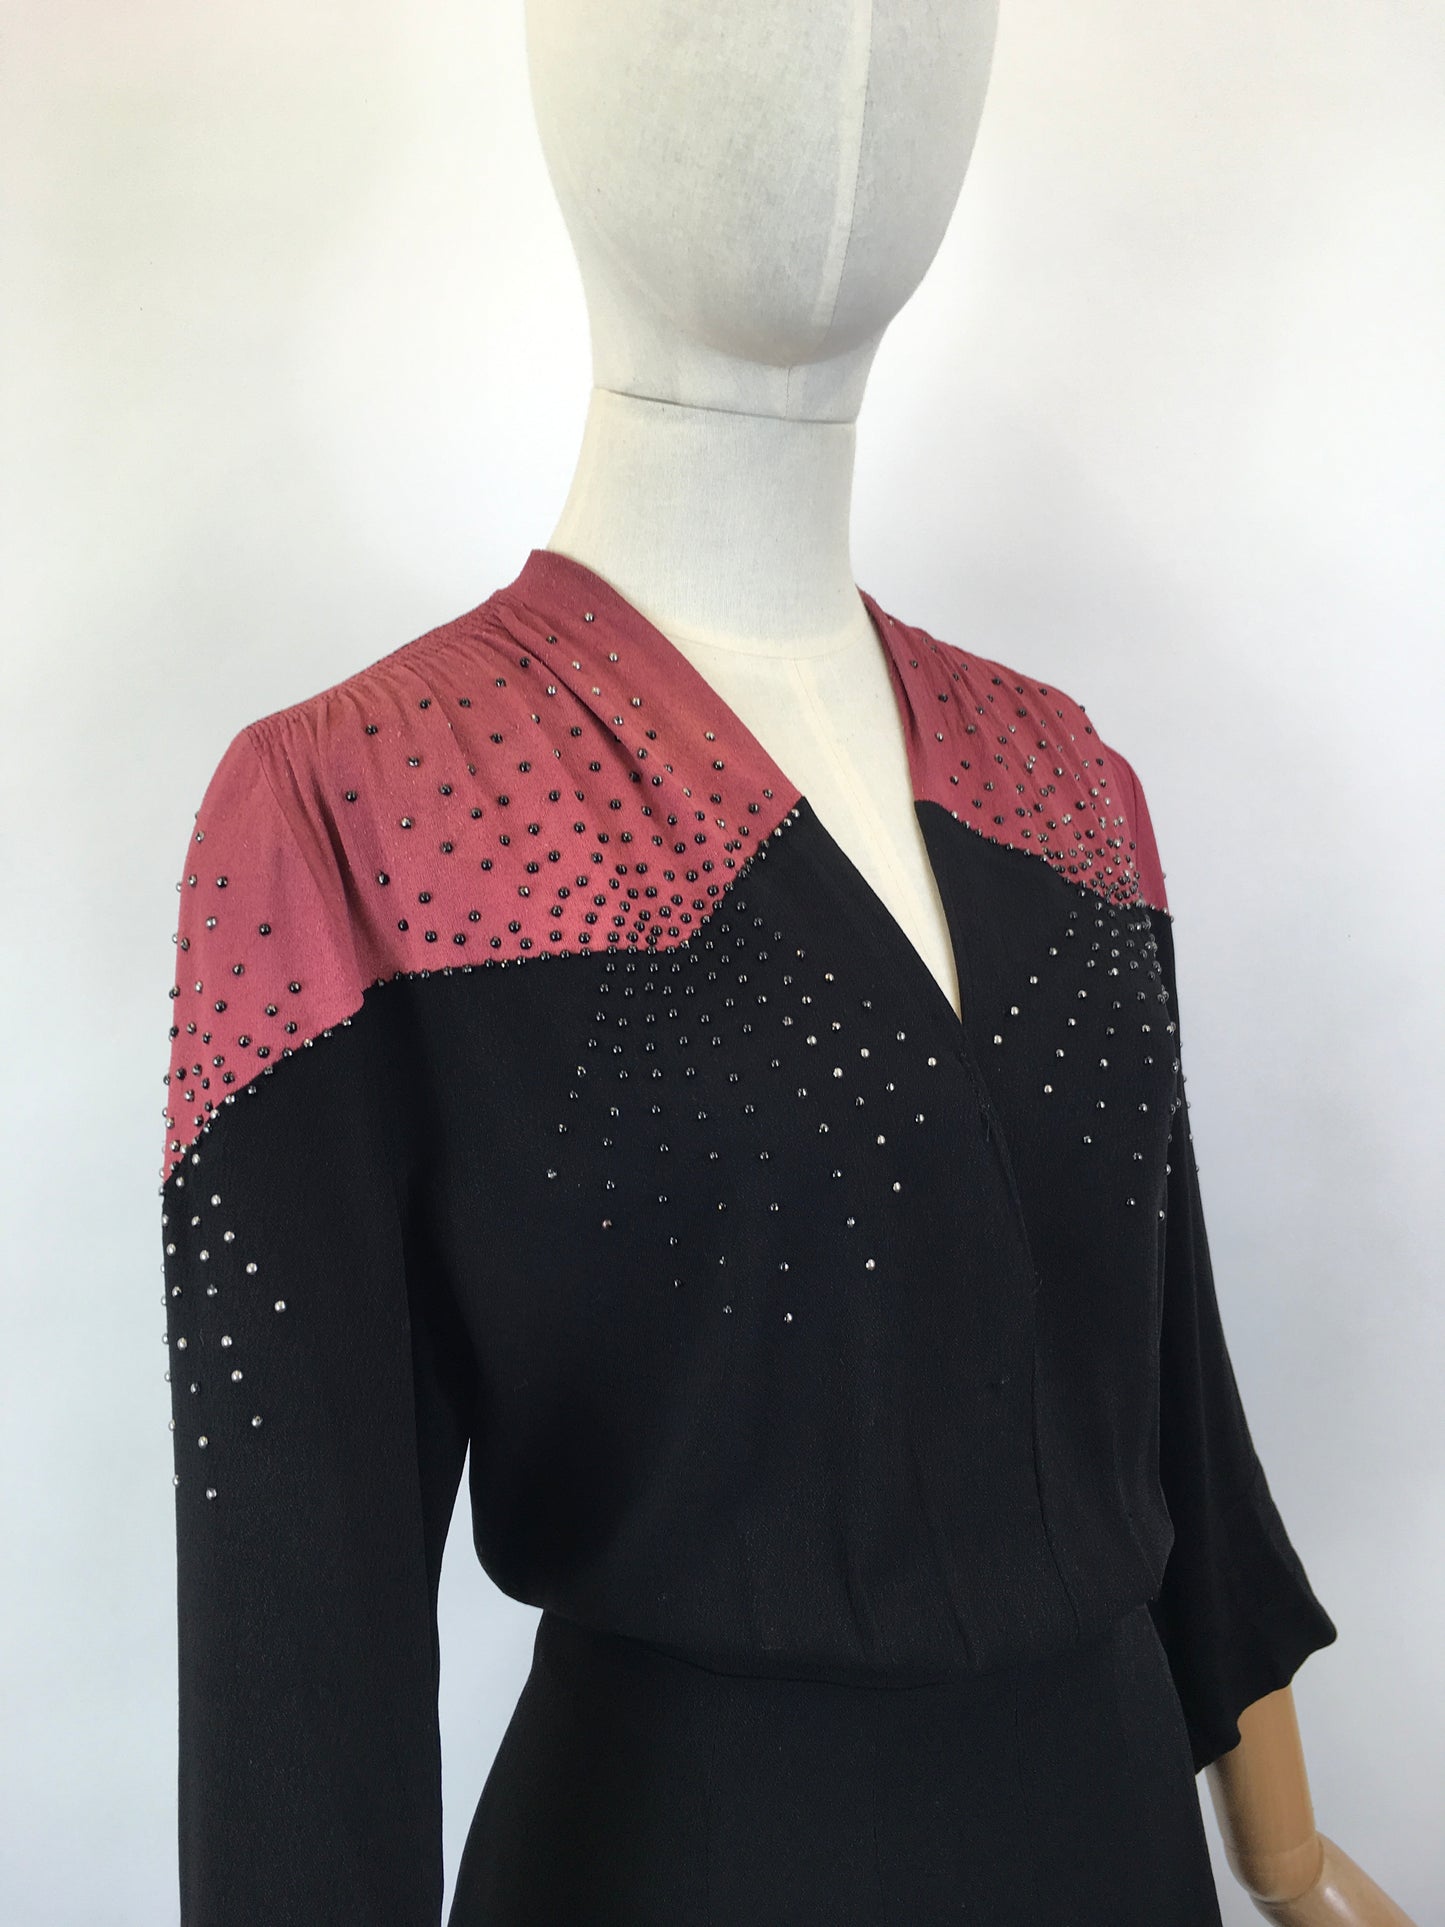 Original 1940’s STUNNING 2 Tone Dress in Fuchsia and Black Rayon Crepe - With Studwork and Shirring